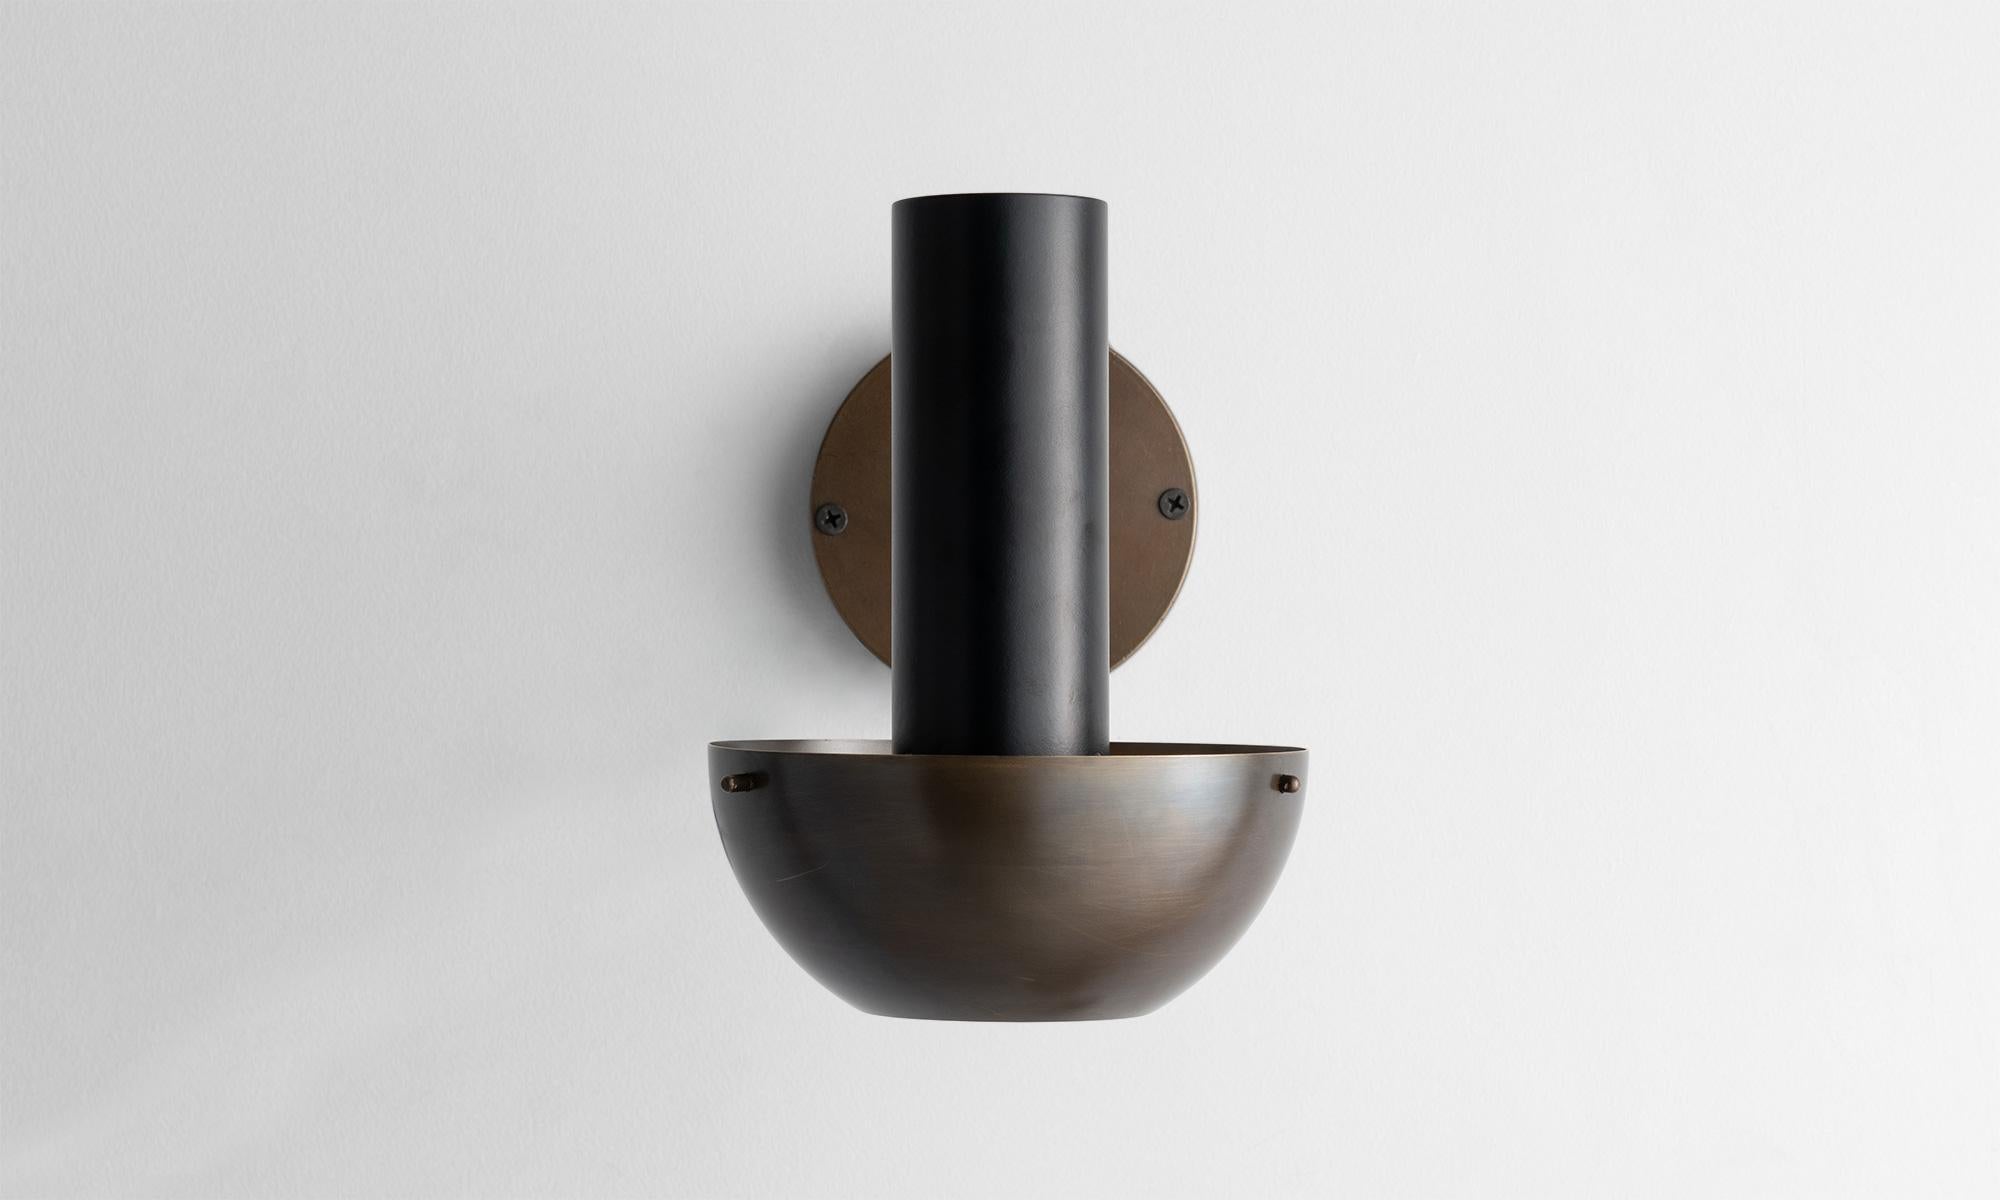 Mid-Century Modern Brass and Black Metal Wall Sconce with Adjustable Arm, Made in Italy For Sale